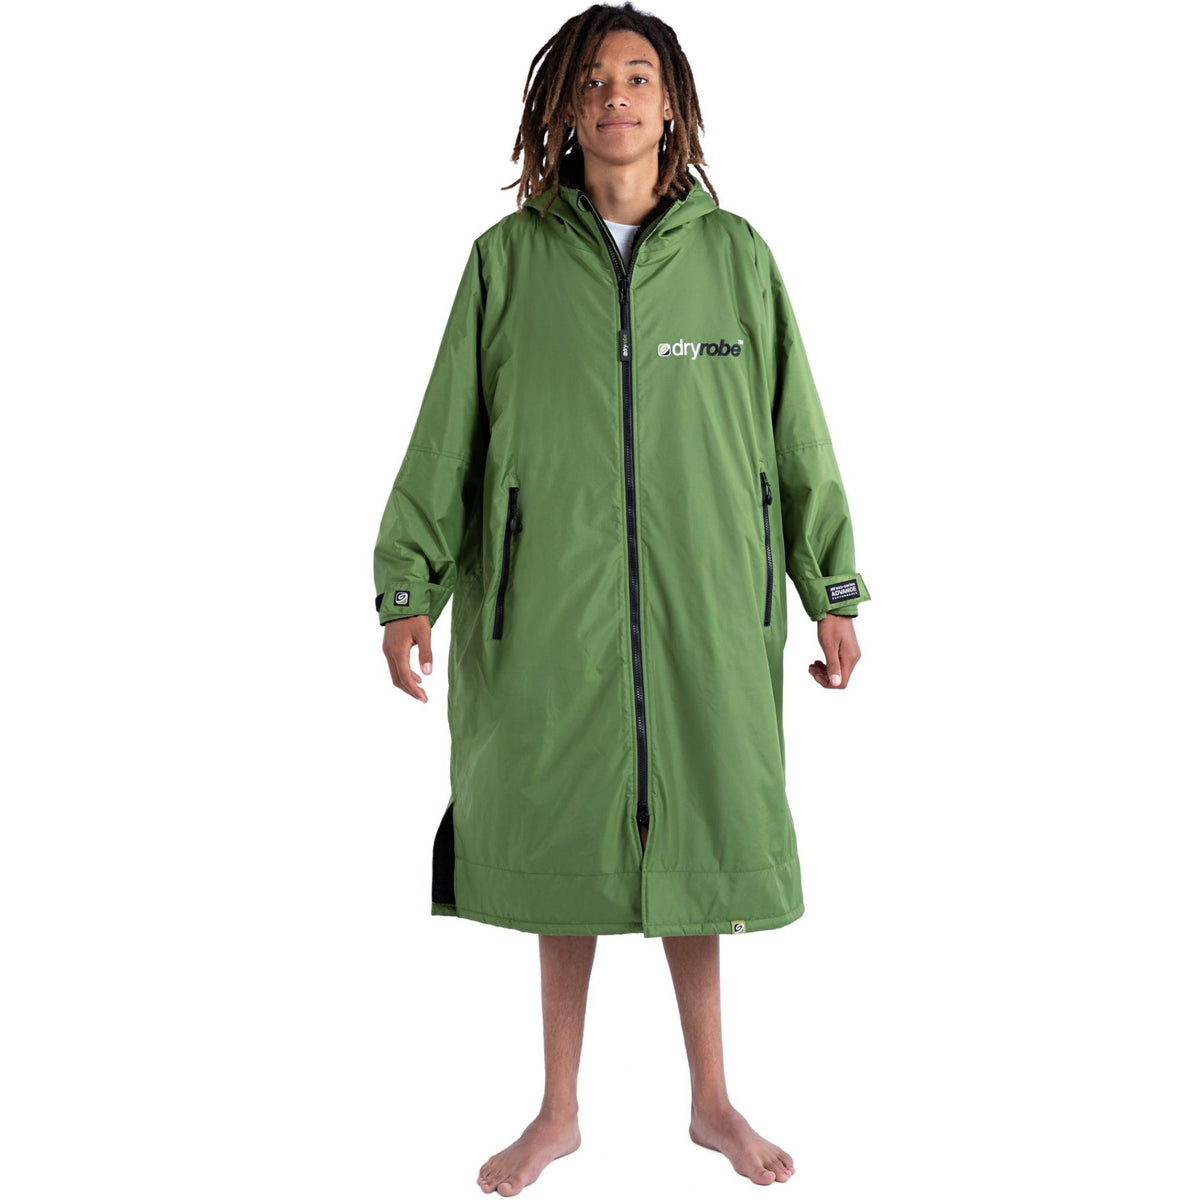 Dryrobe Advance Long Sleeve Drying &amp; Changing Robe - Forest Green/Black - Changing Robe Poncho Towel by Dryrobe